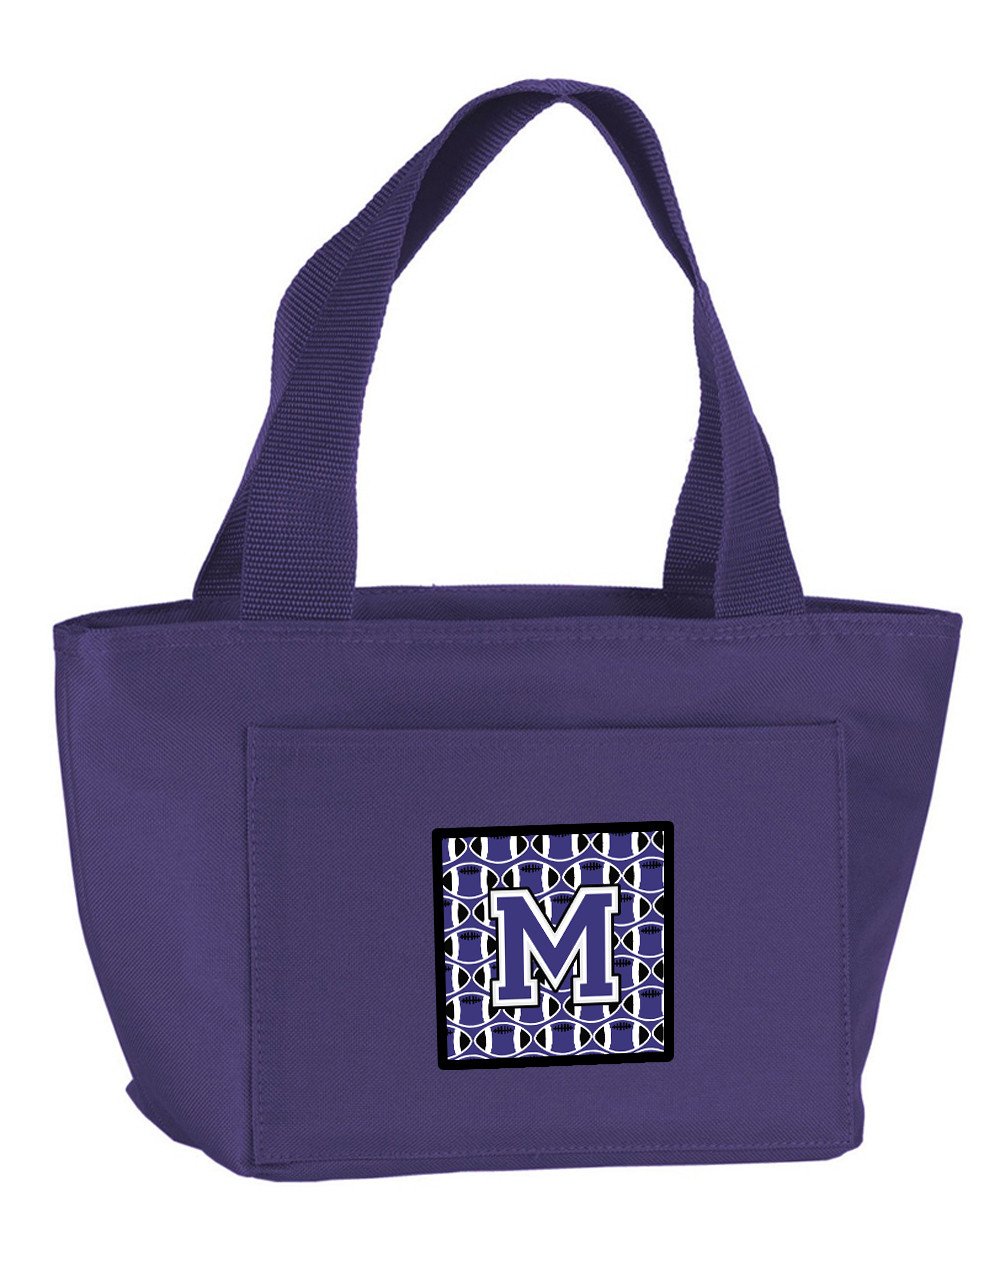 Letter M Football Purple and White Lunch Bag CJ1068-MPR-8808 by Caroline's Treasures